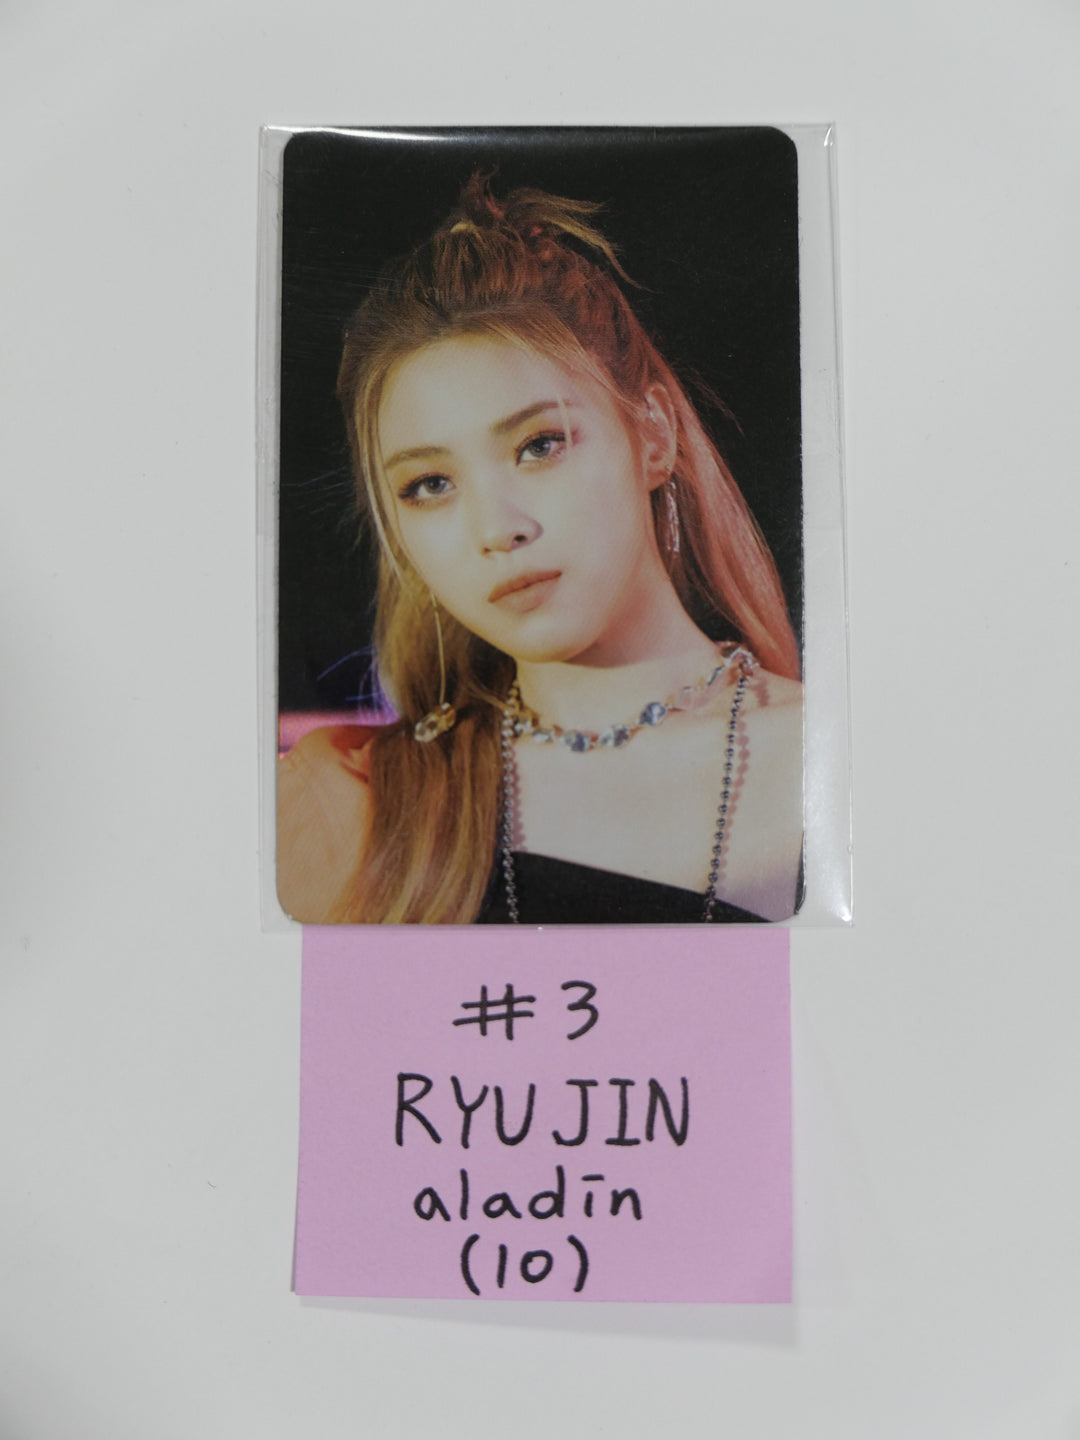 Itzy 'Guess Who' - Aladin Pre-Order Benefit Hologram Photo Card